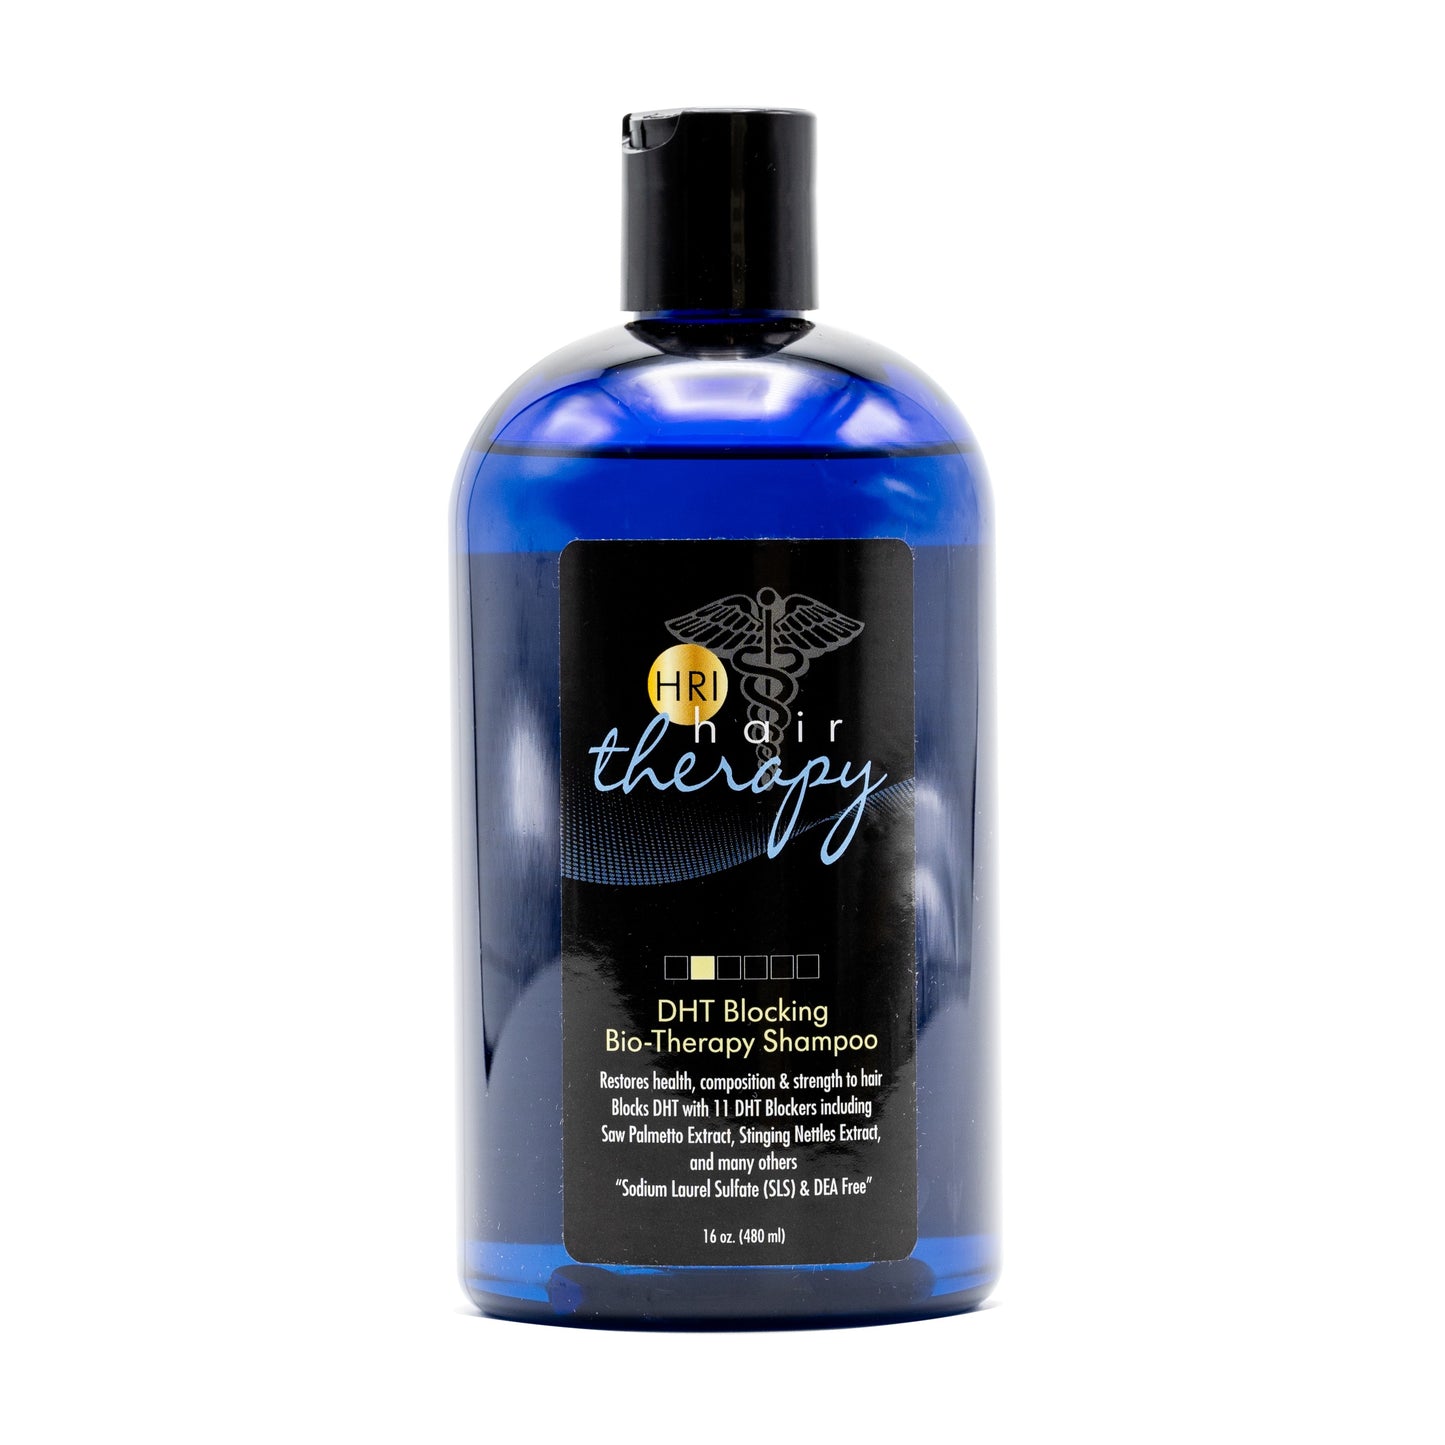 The HRI Men's DHT Blocking Bio-Therapy Shampoo creates the appearance of thicker, fuller hair without the harsh ingredients of most common shampoos.  Our gentle, herbal formula is free of sulfates, Cocamide DEA, SLS, and parabens, our non-irritating shampoo is great for both men and women of all hair types and textures.